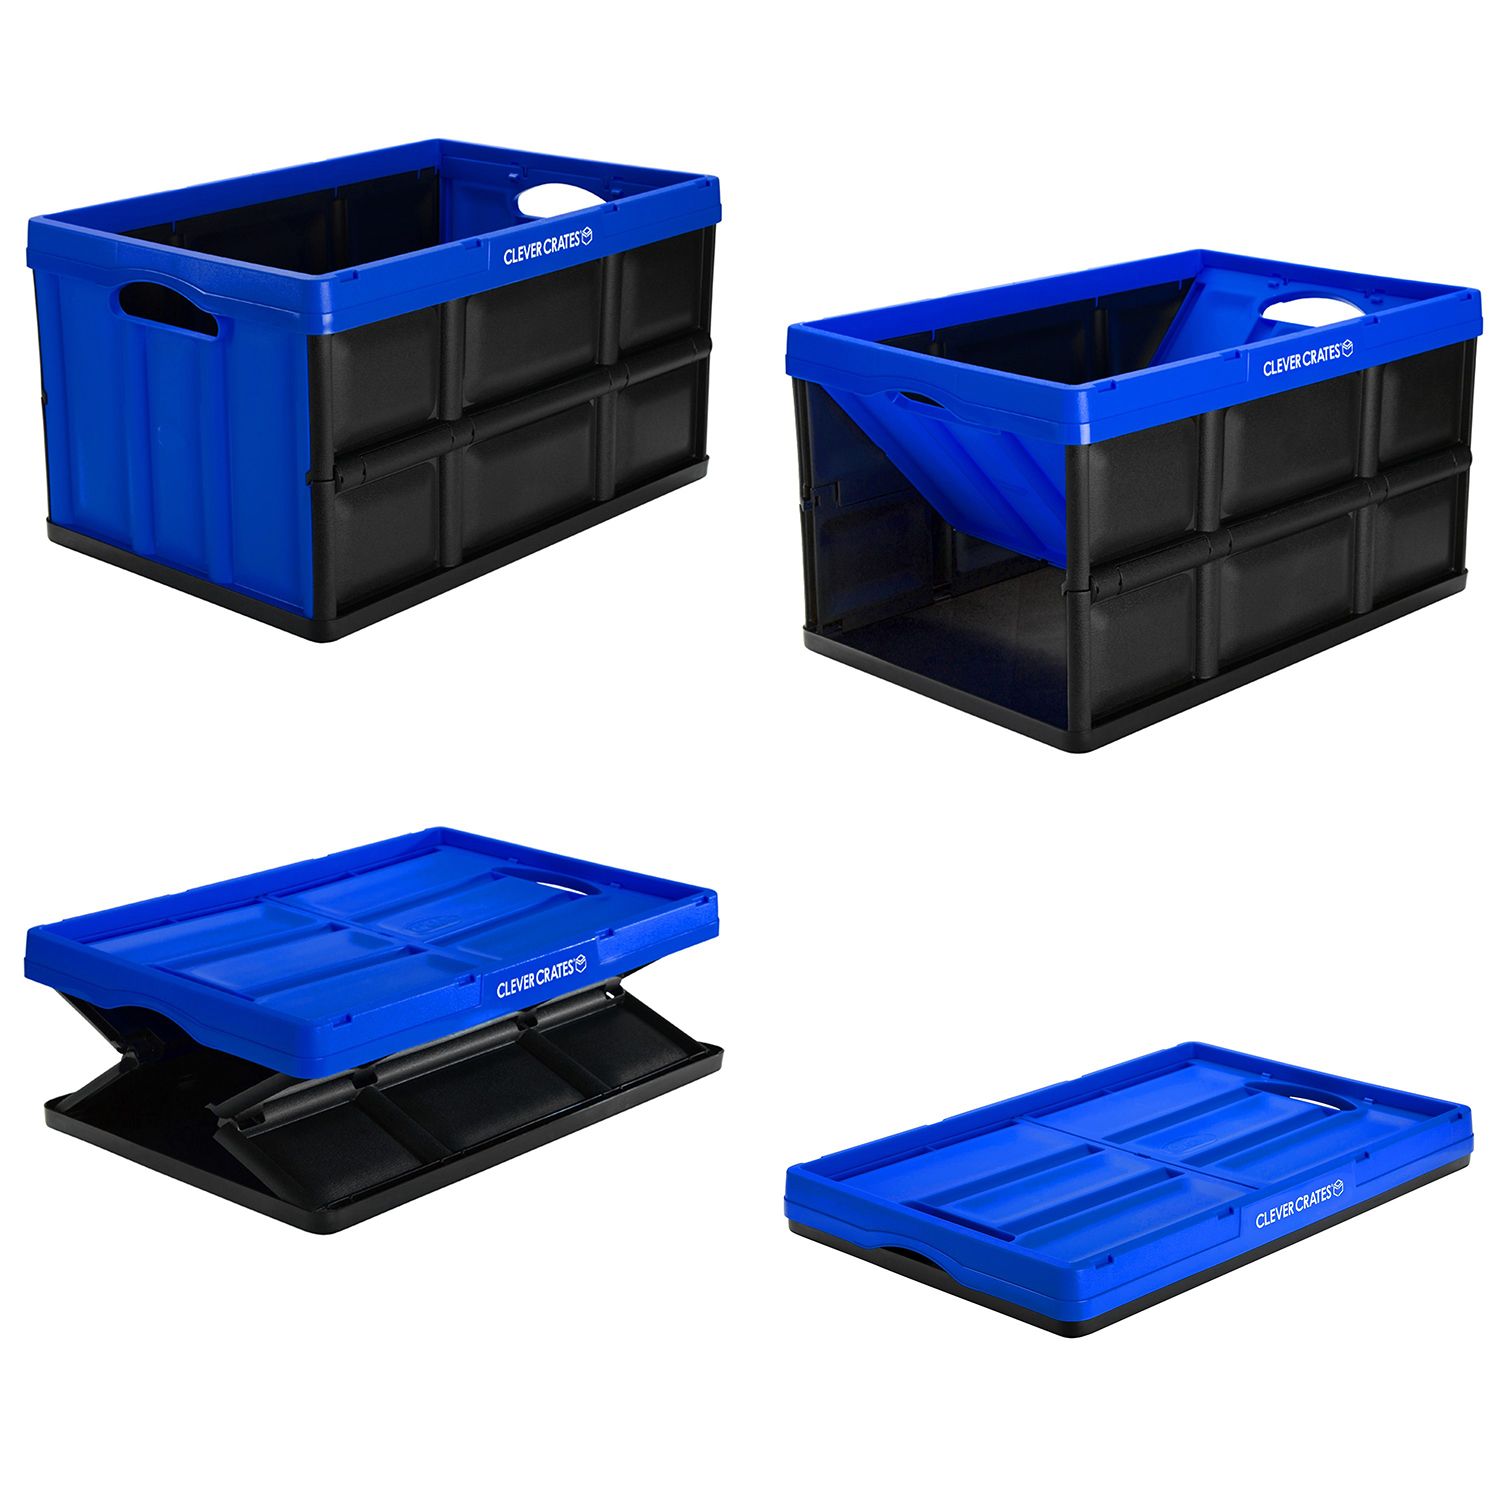 Collapsible Storage Bin - CleverMade